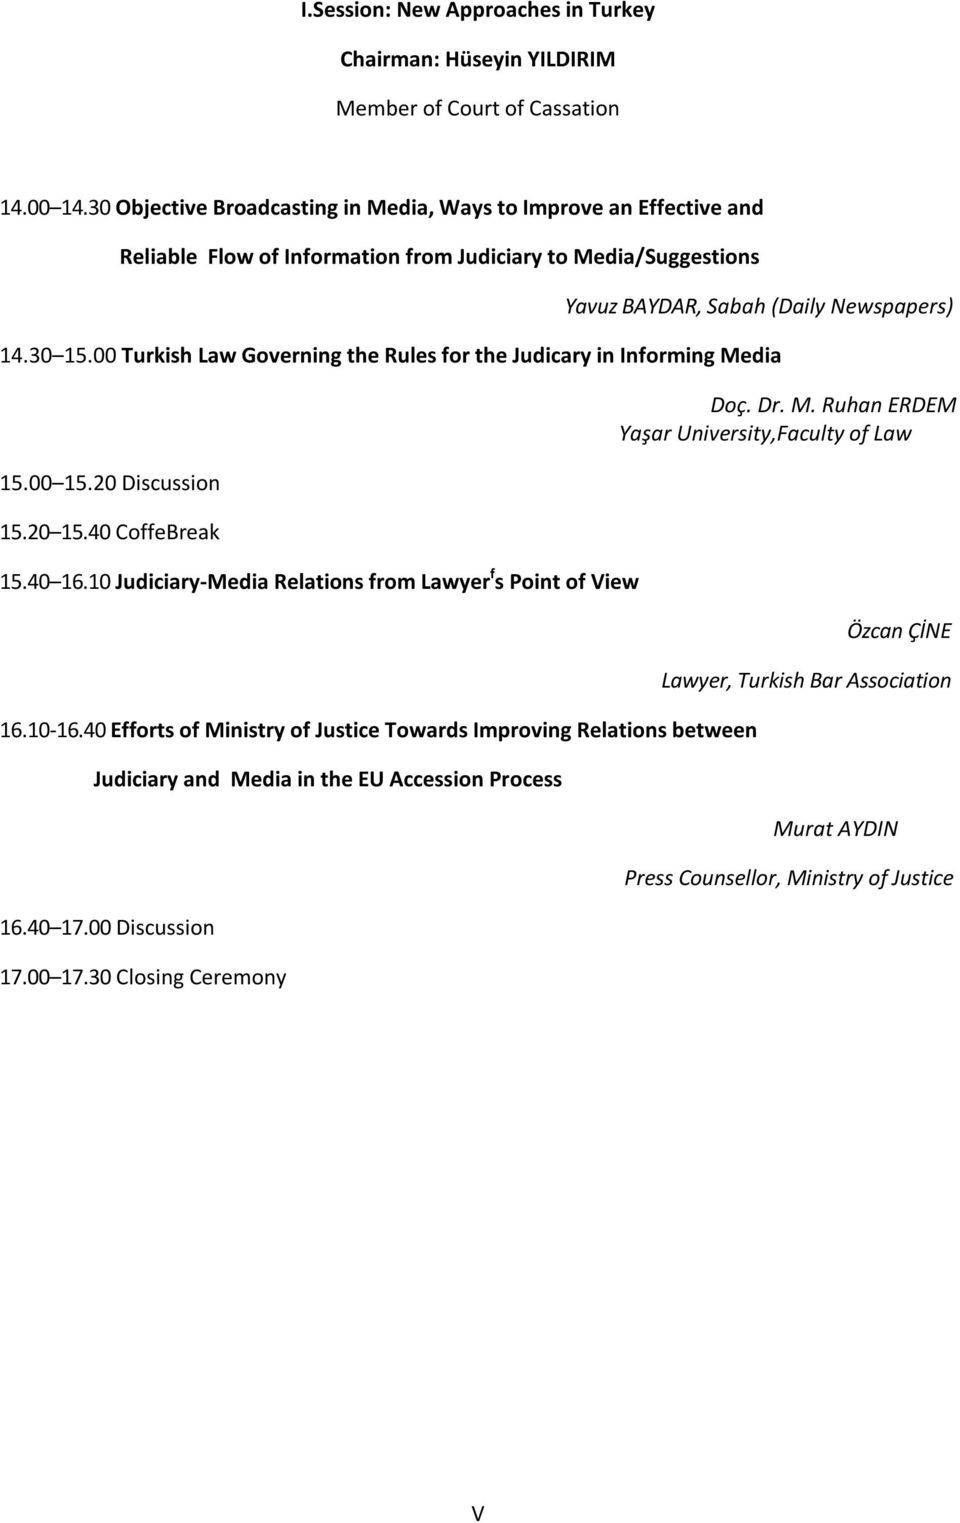 00 Turkish Law Governing the Rules for the Judicary in Informing Media 15.00 15.20 Discussion 15.20 15.40 CoffeBreak 15.40 16.10 Judiciary-Media Relations from Lawyer f s Point of View 16.10-16.